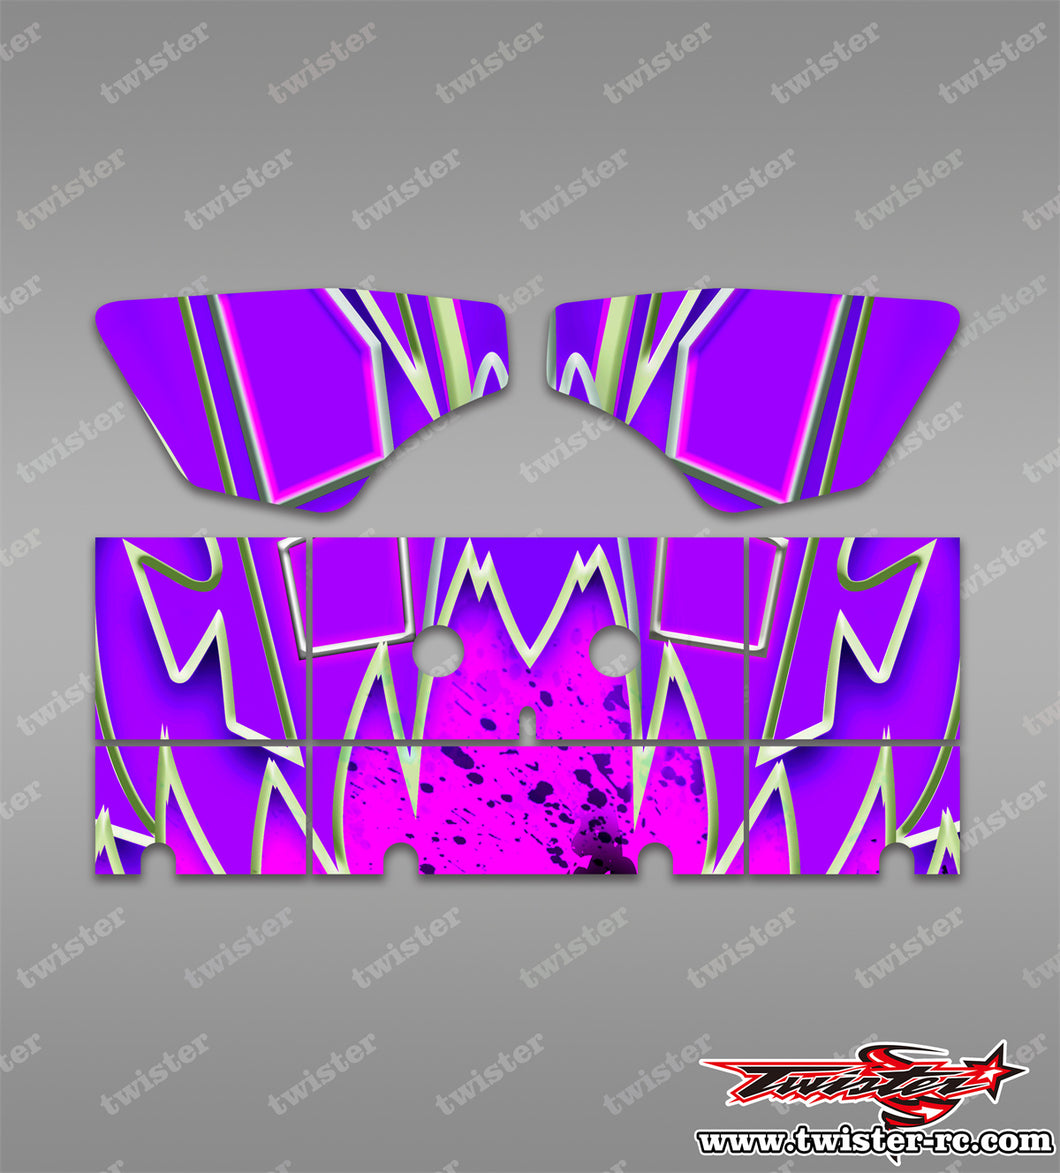 TR-S8W-MA18 Serpent SRX8 Wing Metallic/Optical White Pattern Wrap ( Type A18 )4 Colors